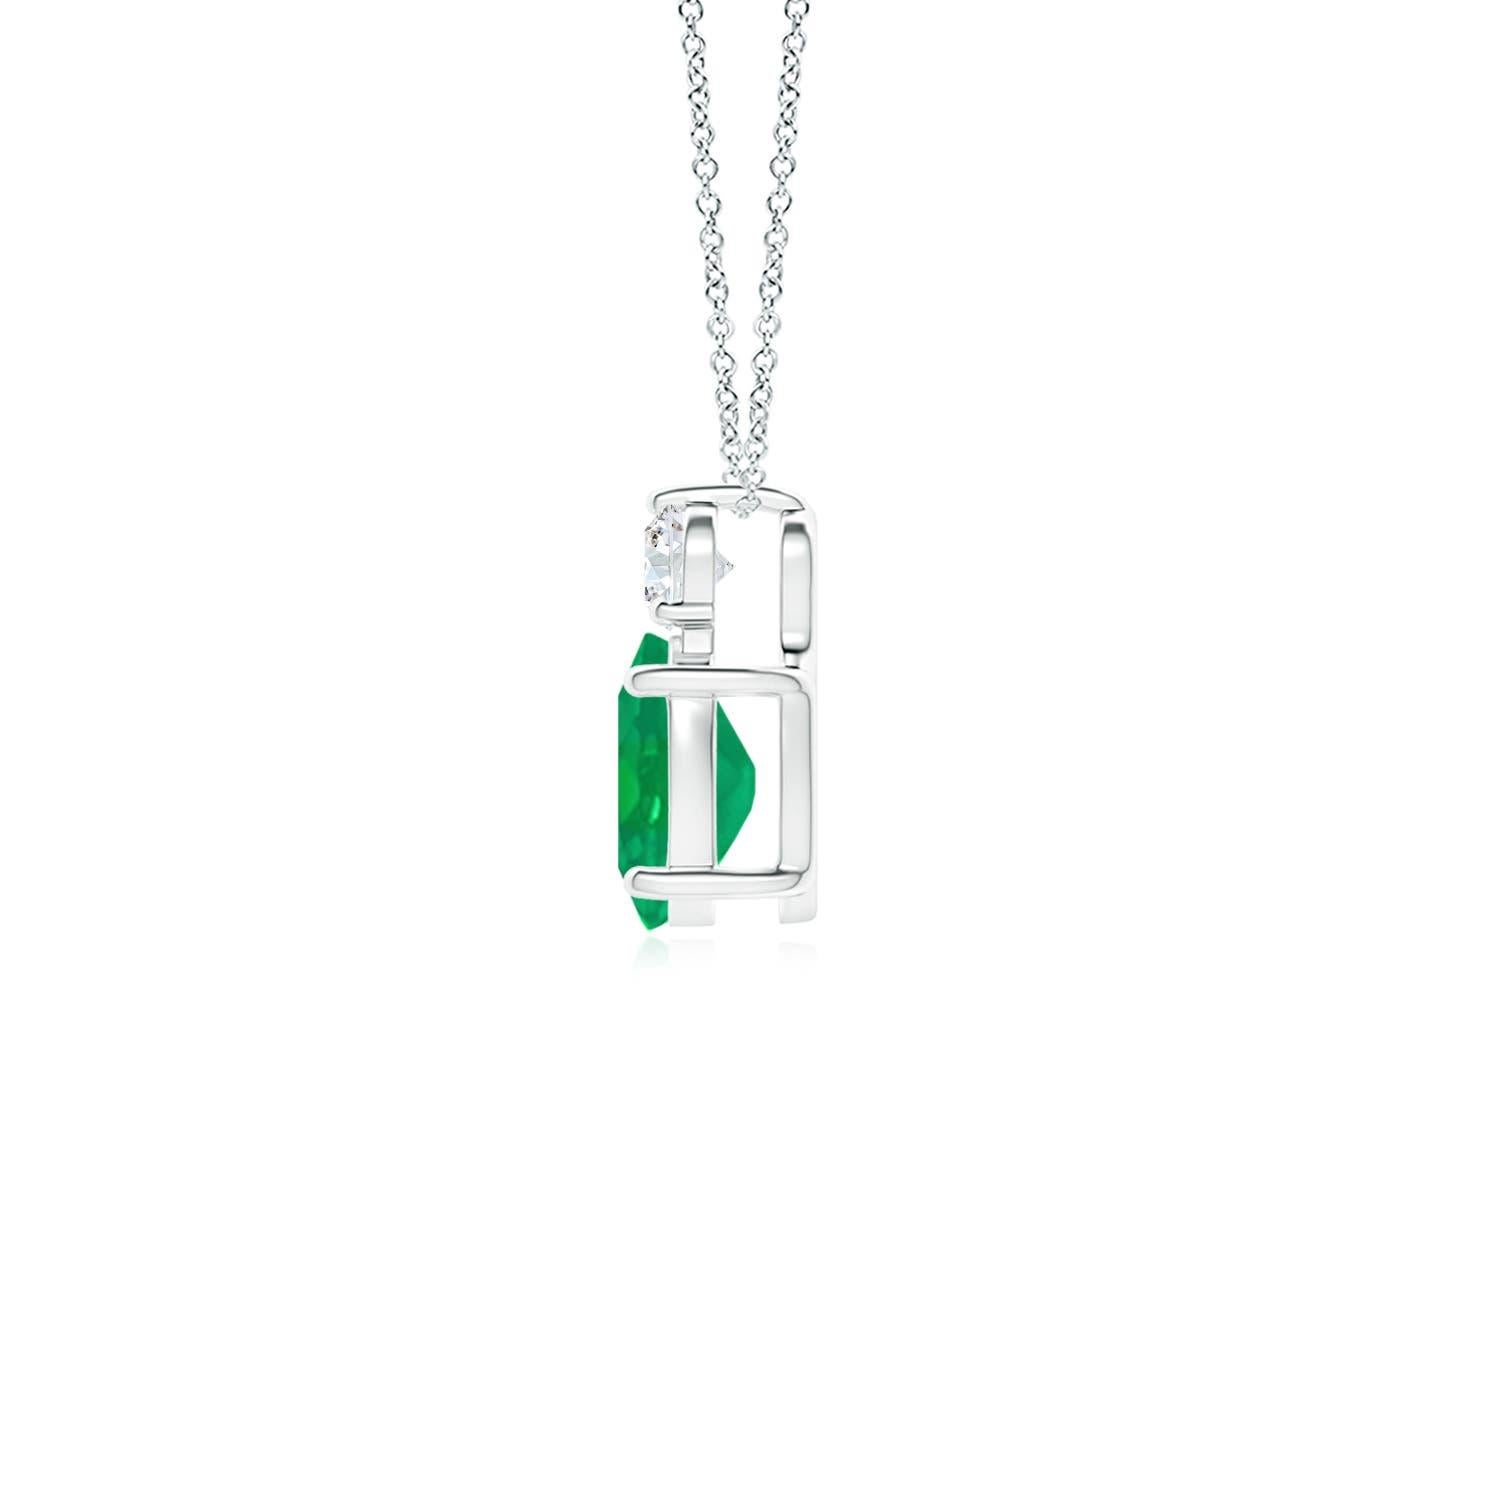 Crafted in Platinum, this classic solitaire emerald pendant personifies elegance. The rich green oval emerald is topped by a sparkling diamond for added allure. The intricate scroll work on the sides enhances this prong set emerald pendant's